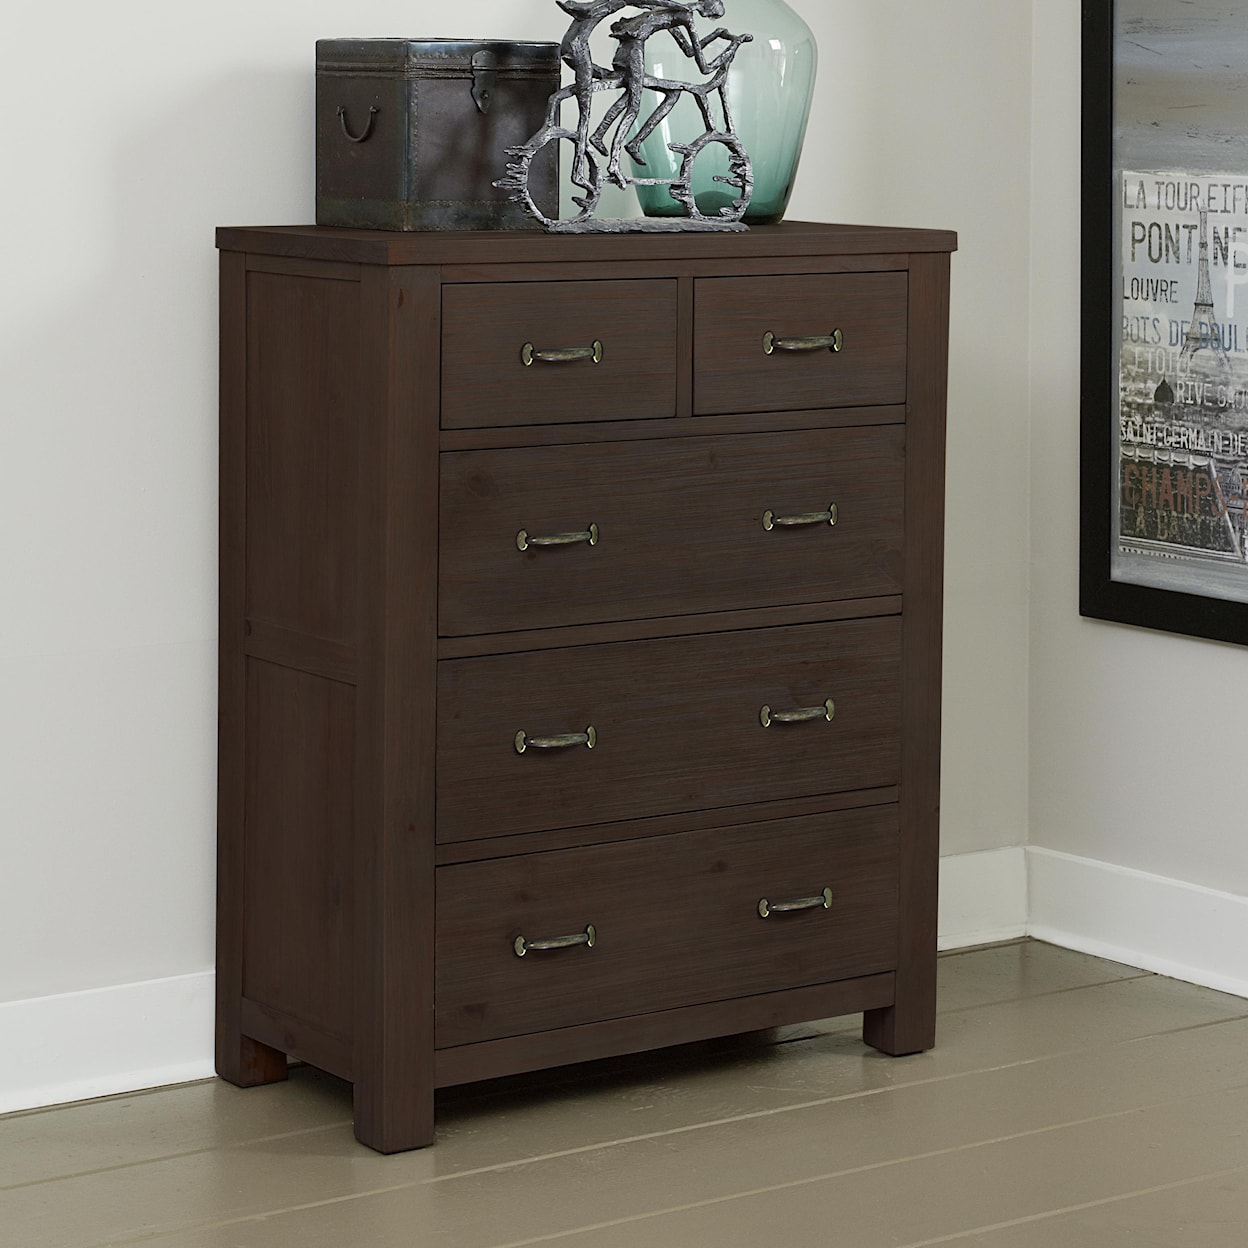 Hillsdale Kids Highlands Chest of Drawers